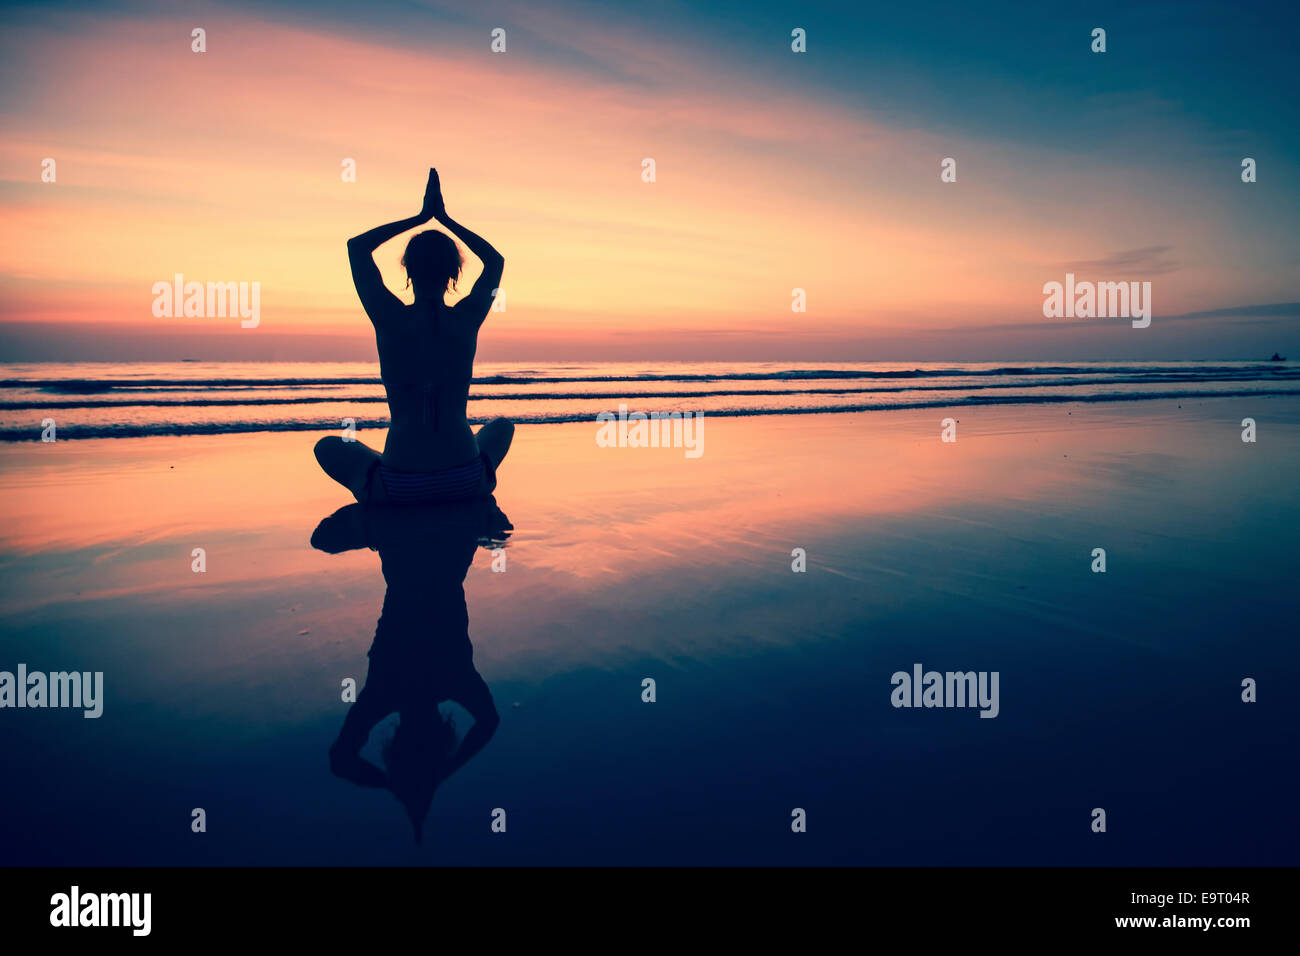 Silhouette young woman practicing yoga on beach at surrealistic sunset. Stock Photo